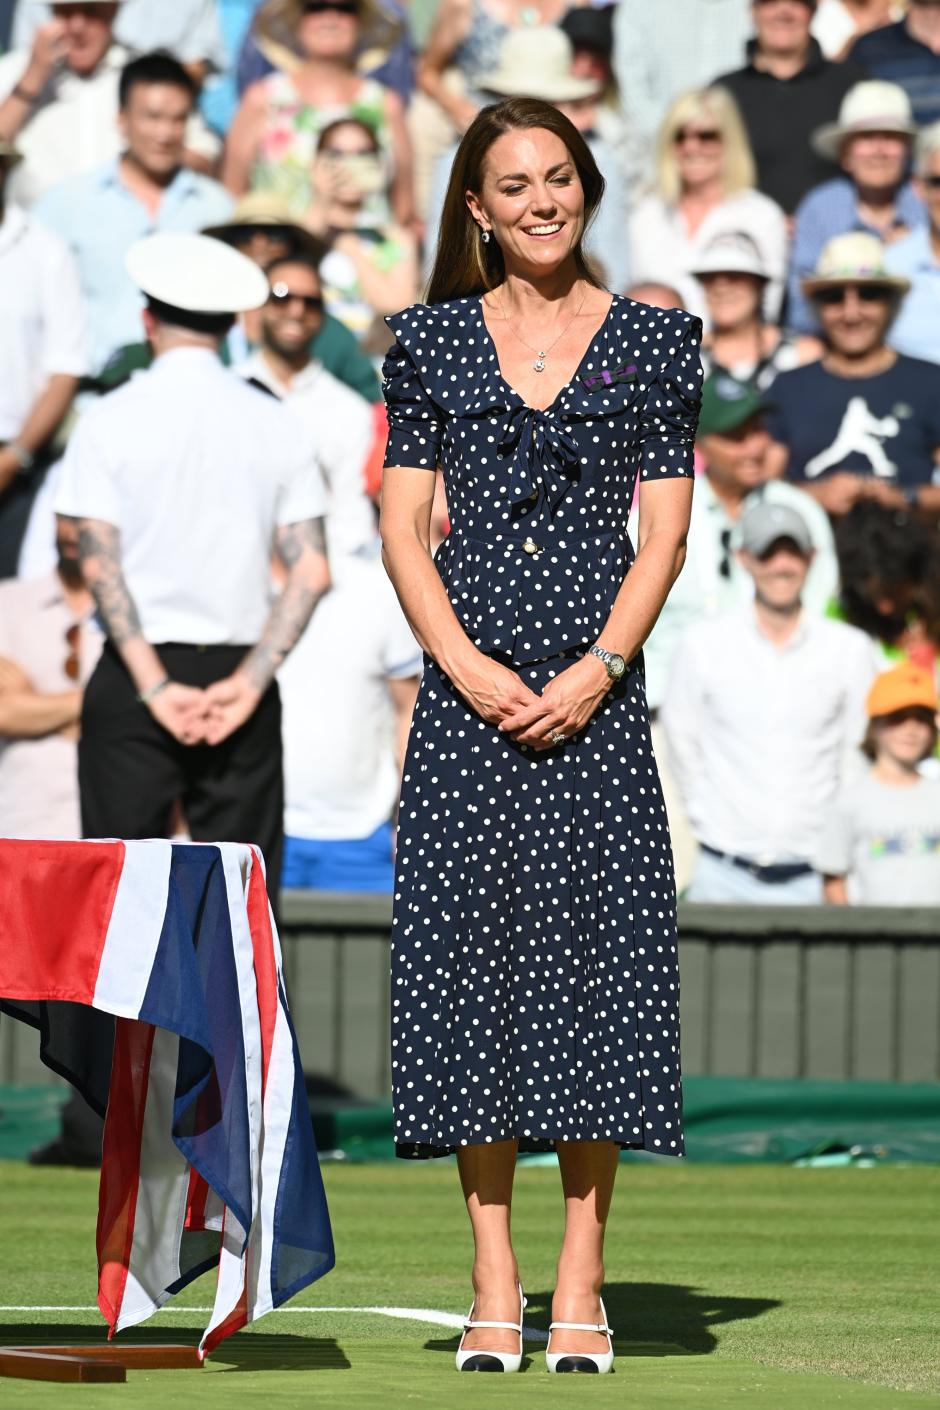 Catherine, Duchess of Cambridge watches tennis In the royal box on centre court the men's singles quarter finals men's between Novak Djokovic of Serbia play Jannik Sinner of Italy on day 9 of the Wimbledon Tennis Championships held at the All England Lawn Tennis and Croquet Club.
Wearing Alessandra Rich